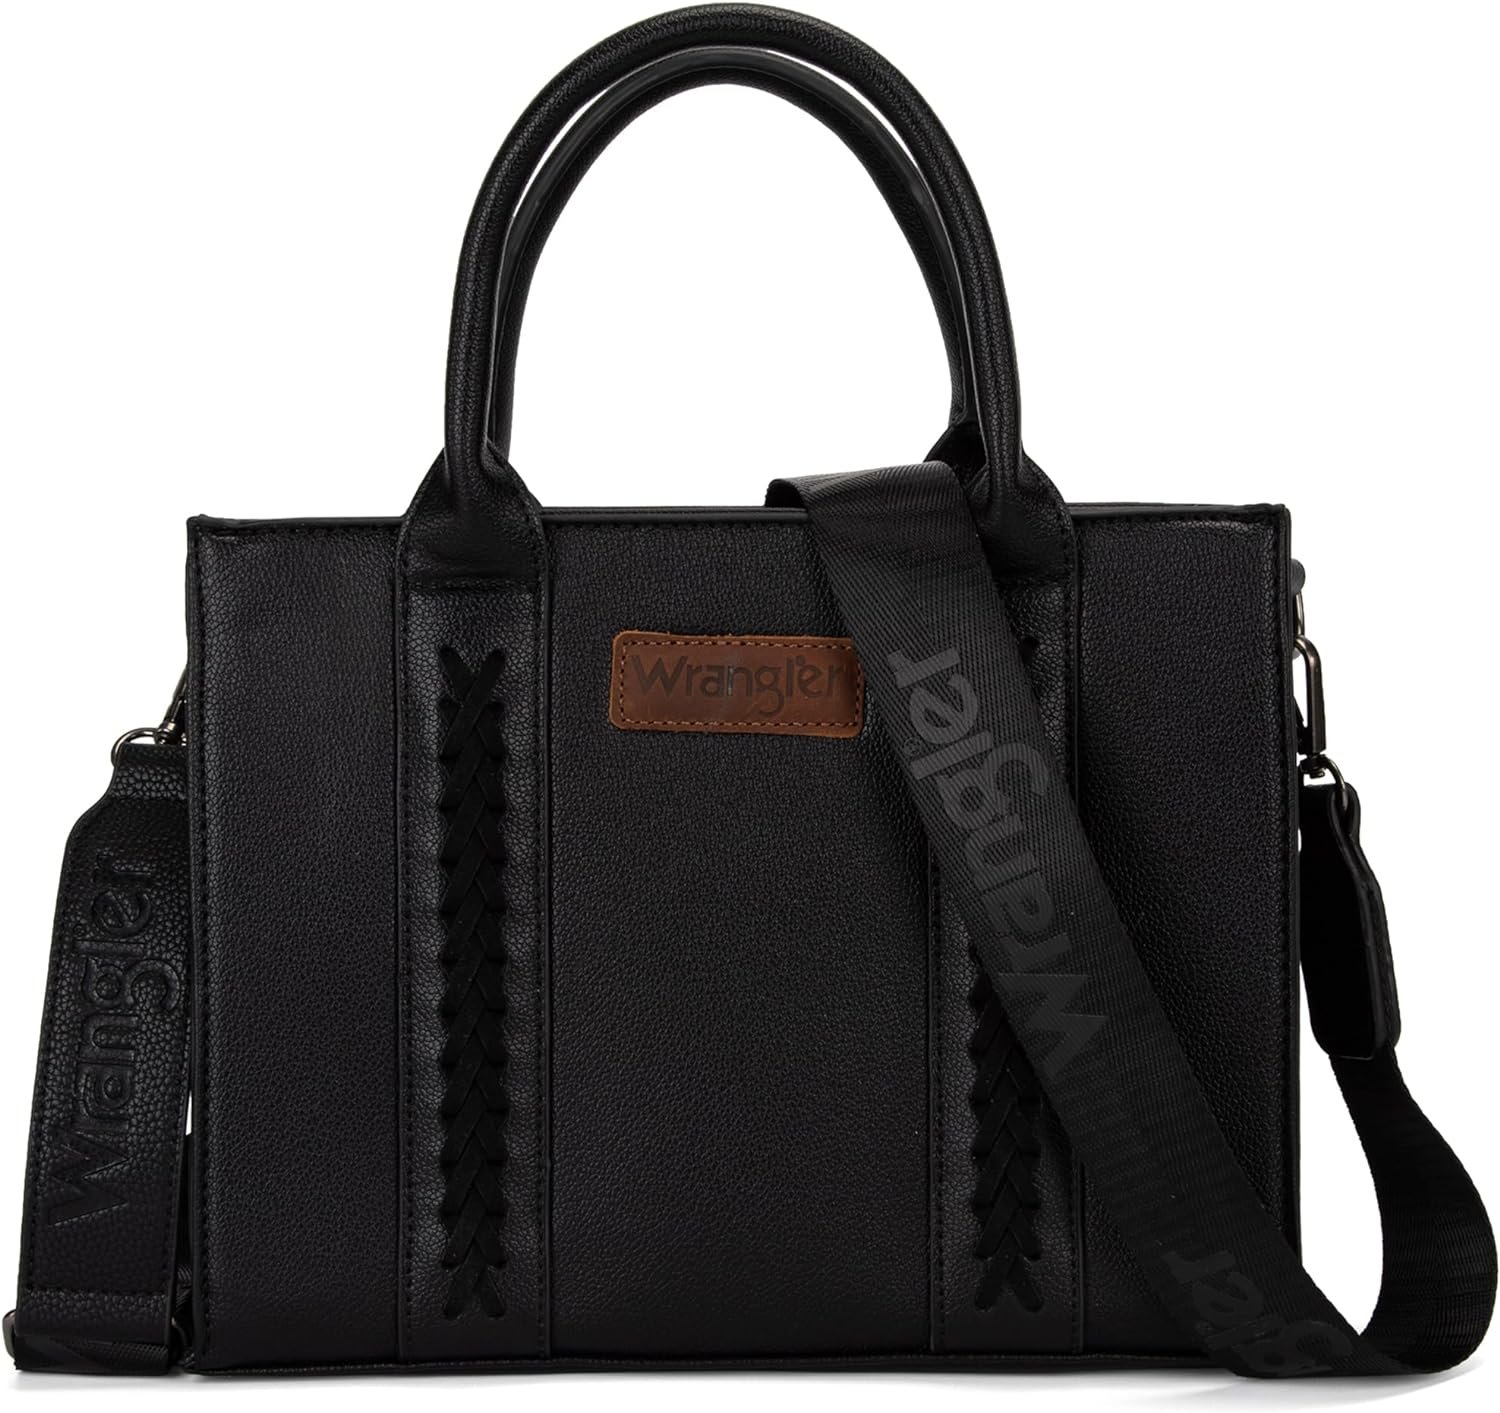 Wrangler Tote Bags for Women Top-handle Handbags and Purses for Women